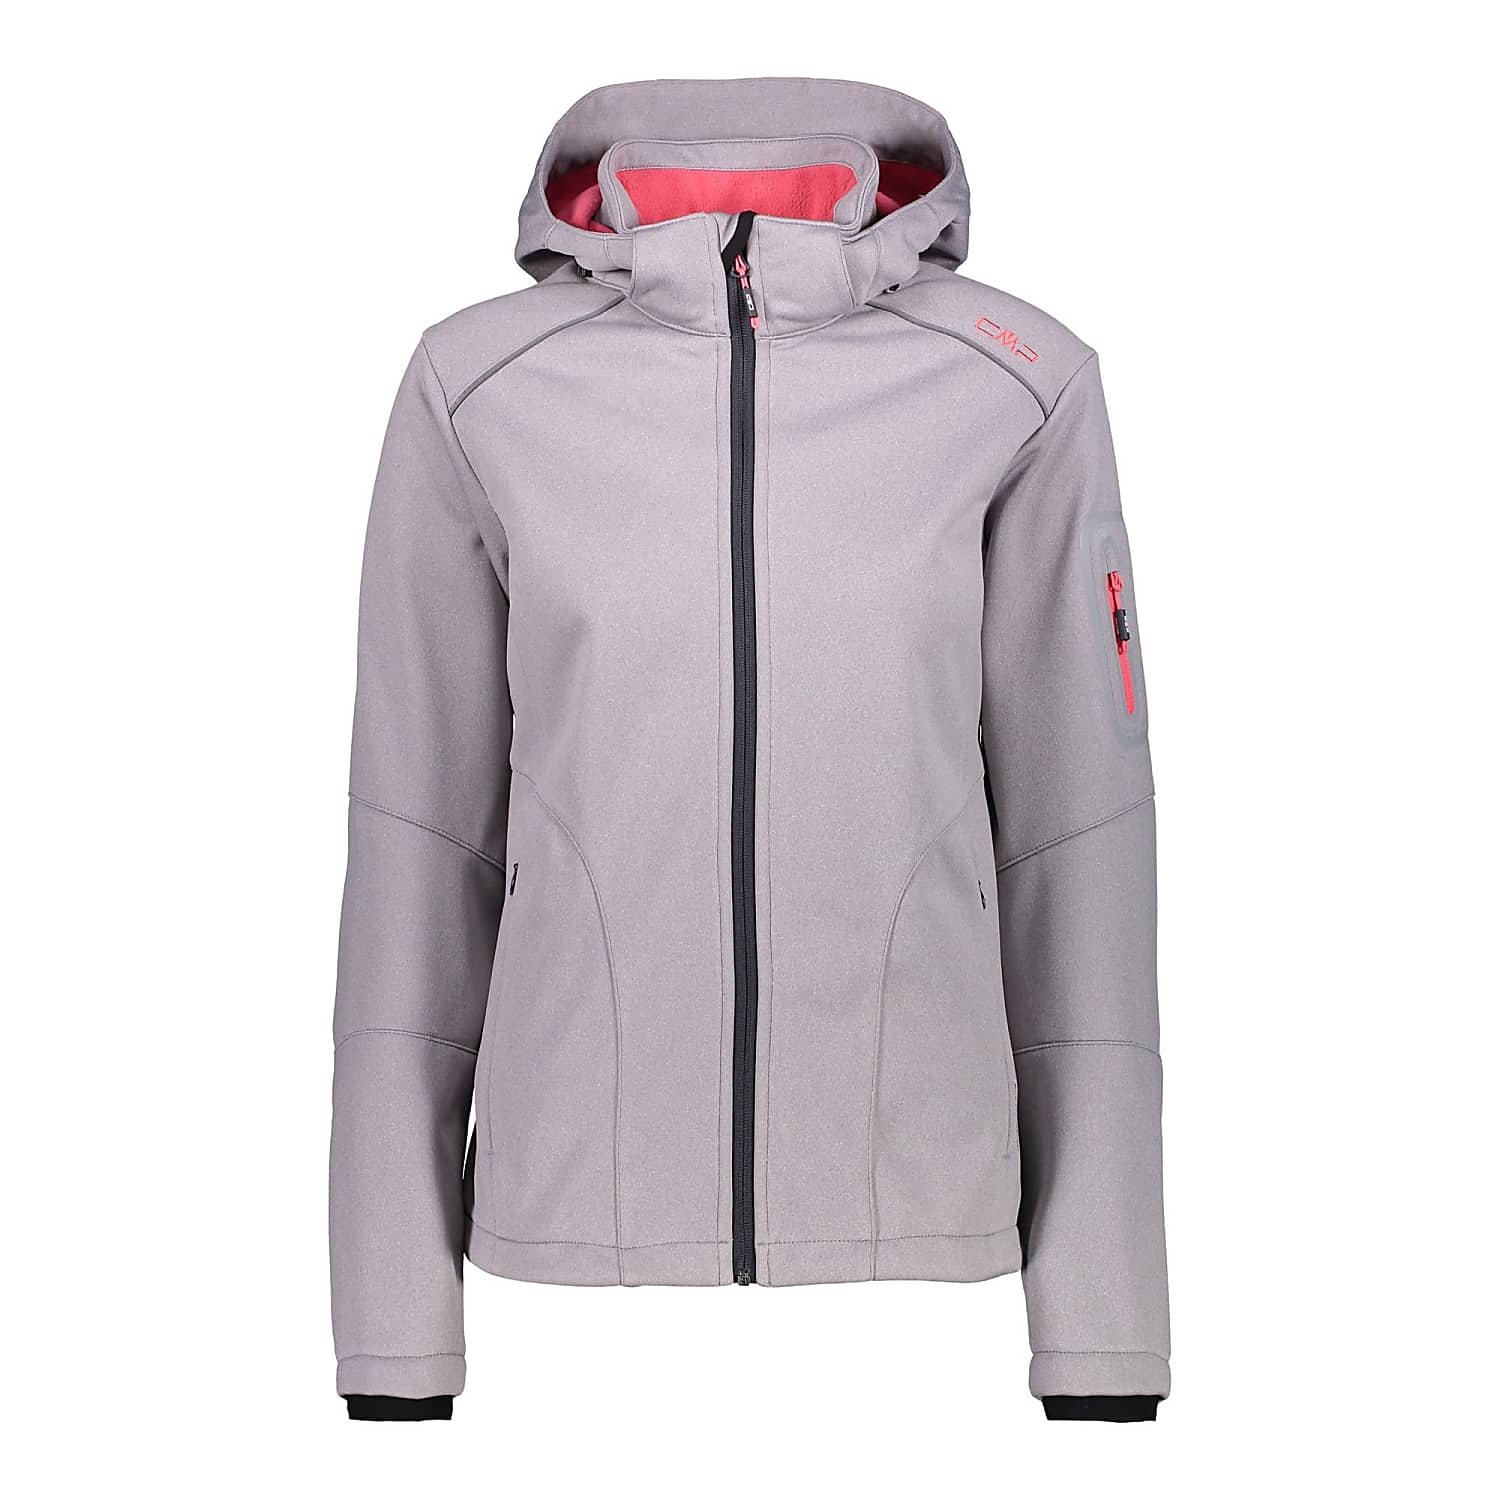 and cheap W ZIP - - HOOD Corallo Argento CMP JACKET Fast shipping Mel. SOFTSHELL,